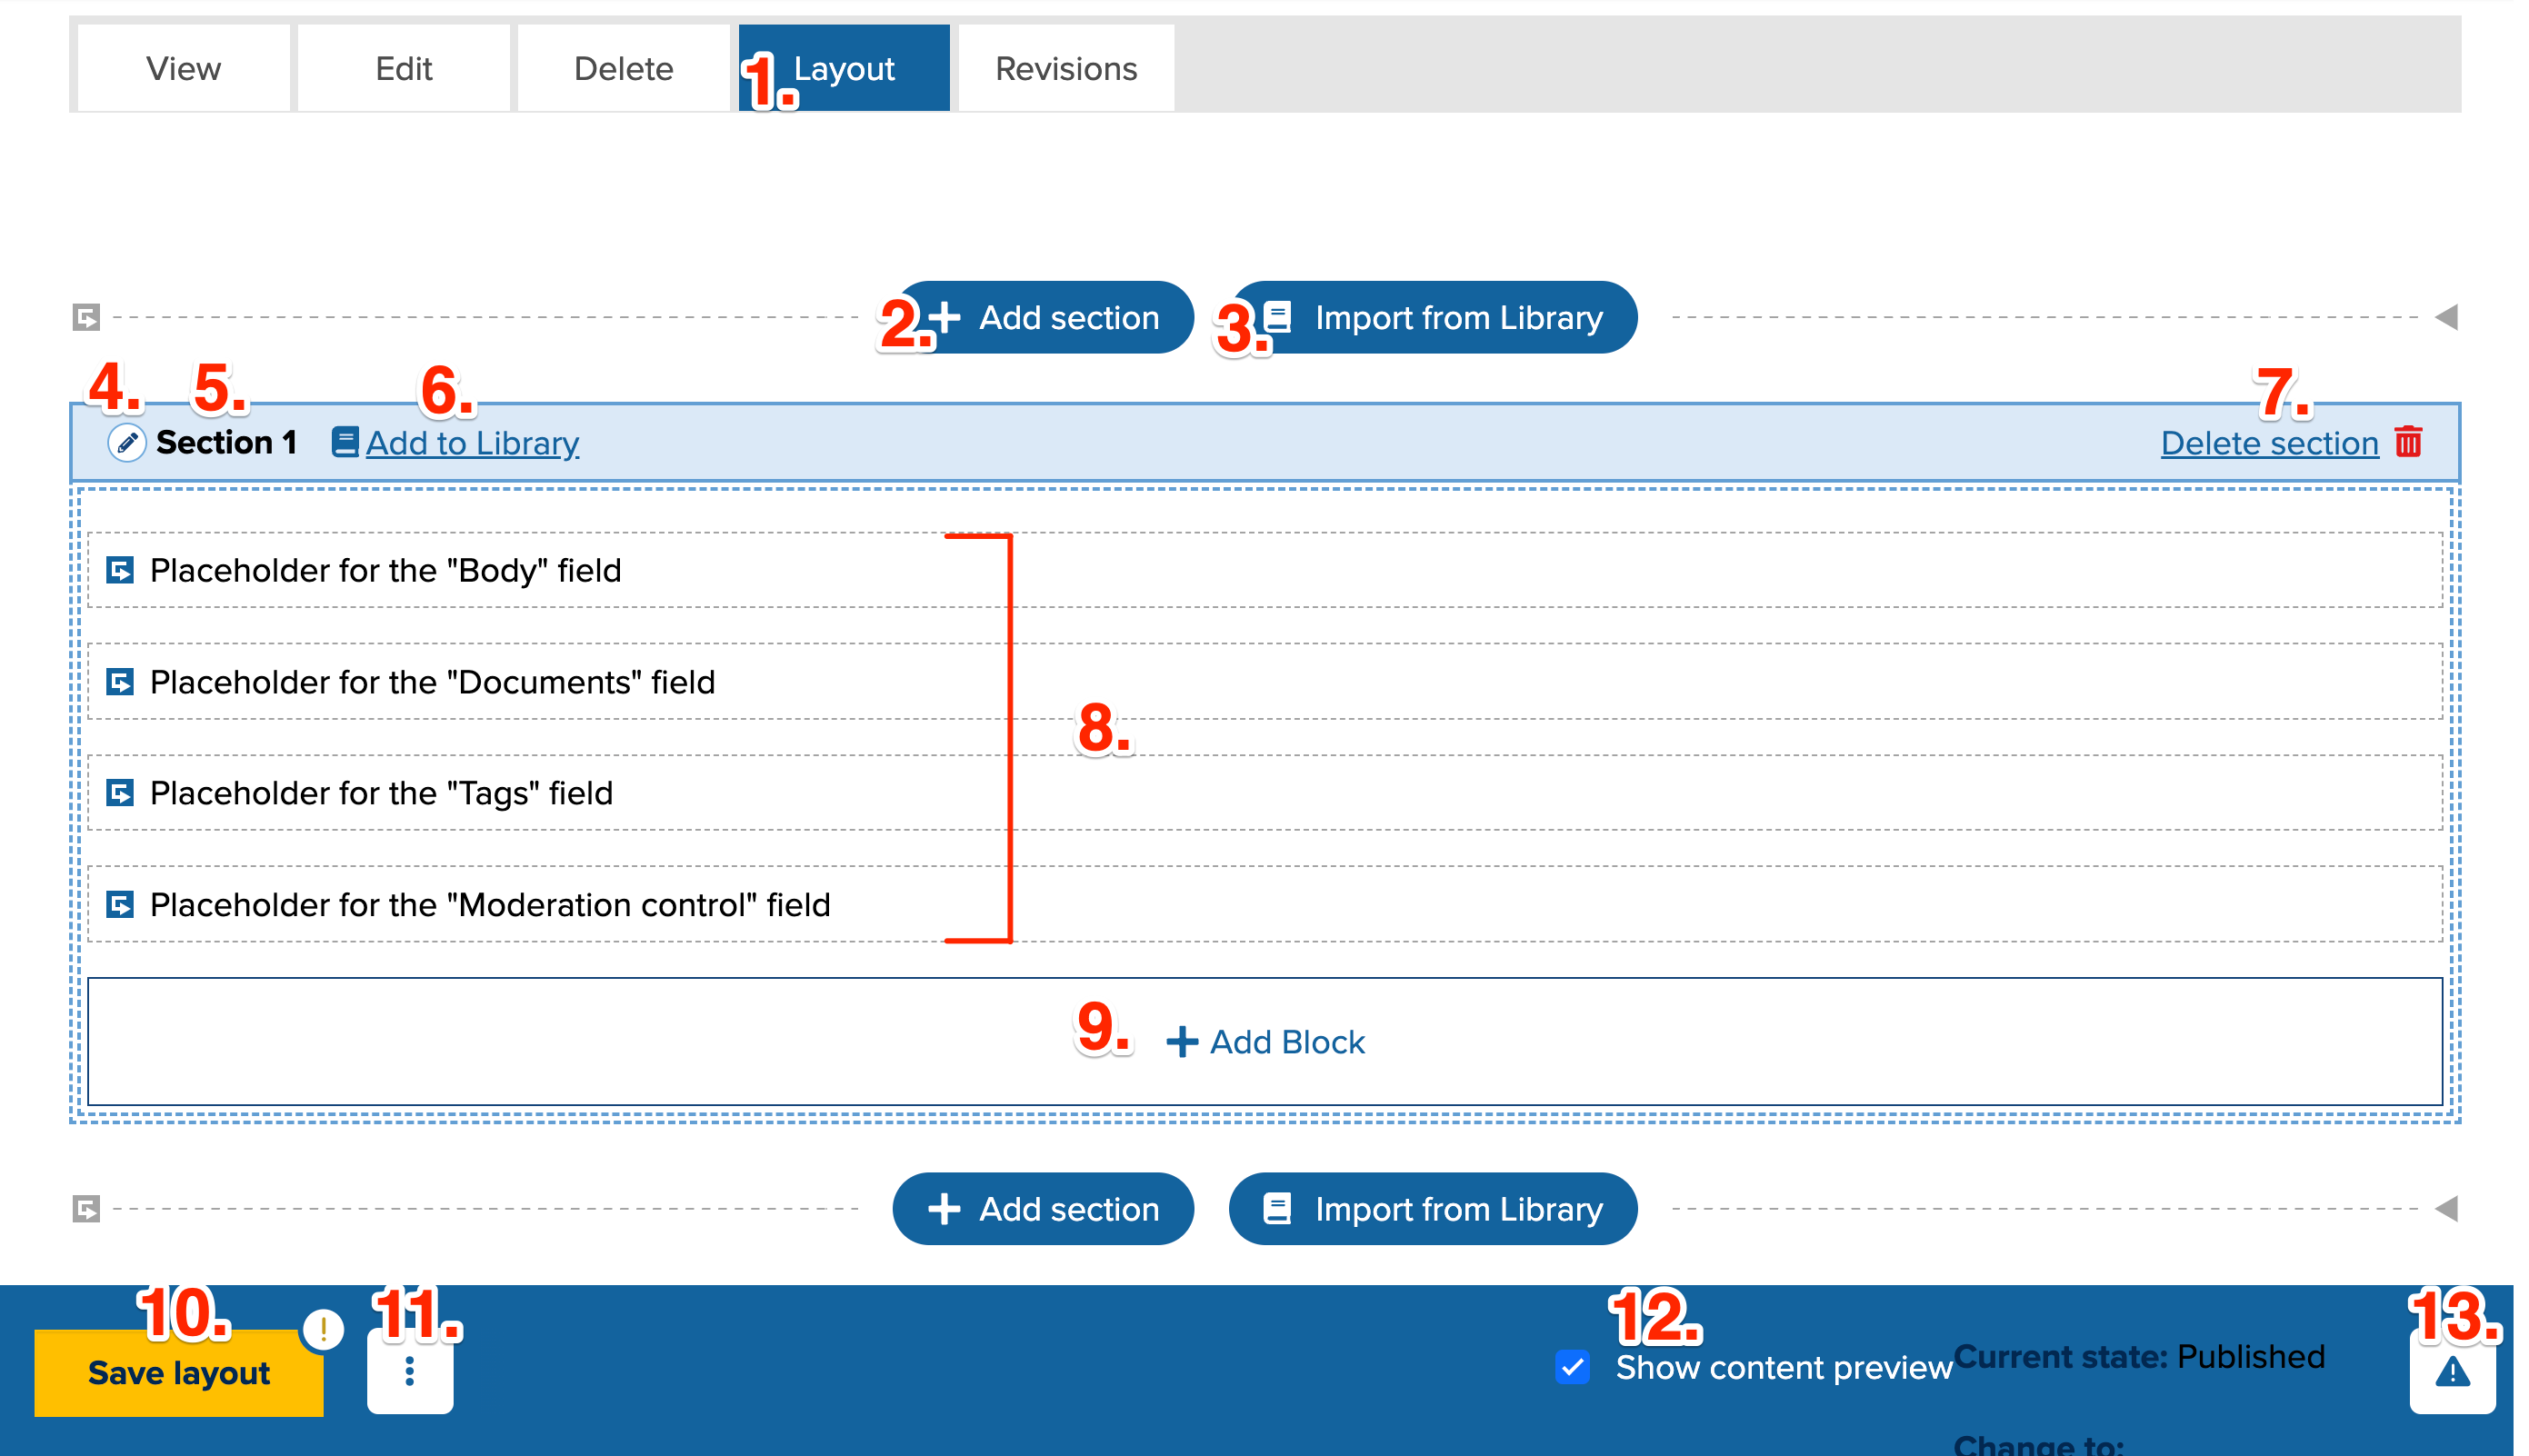 A screenshot of the Layout Builder user interface before anything has been added and with each section annotated with a number to help identify its name and function in the description that follows.